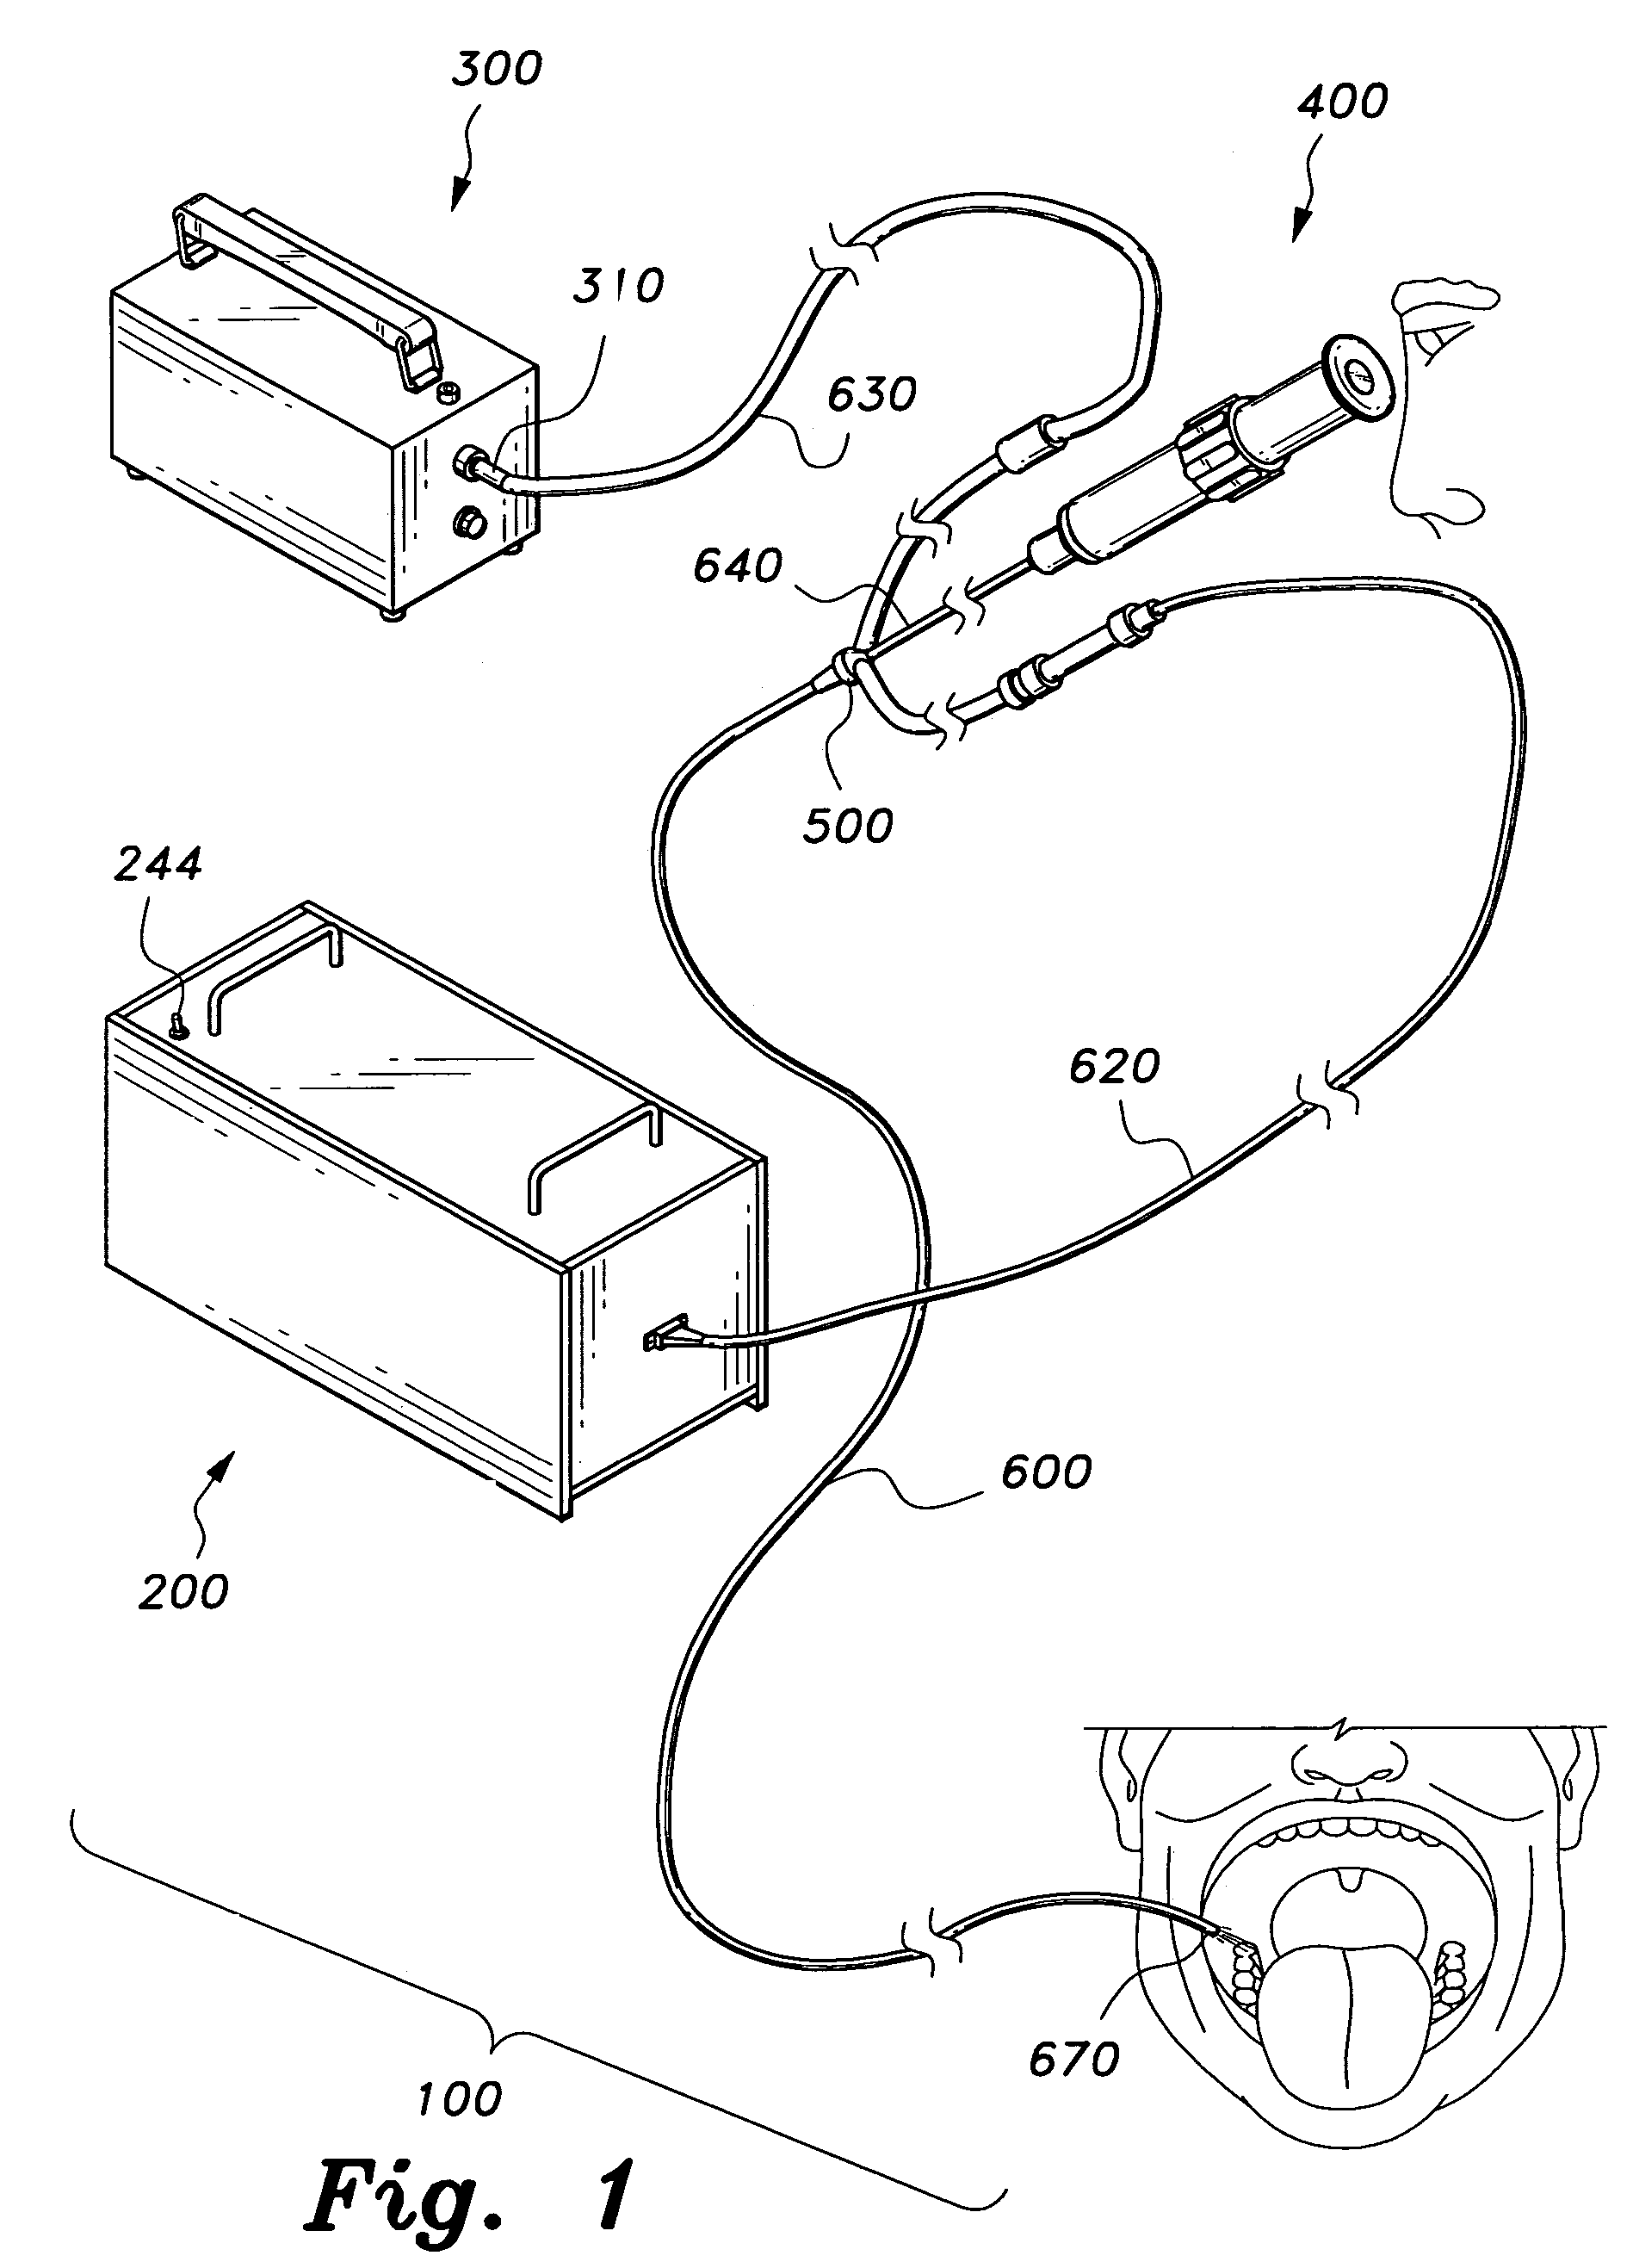 Device for ultraviolet radiation treatment of body tissues